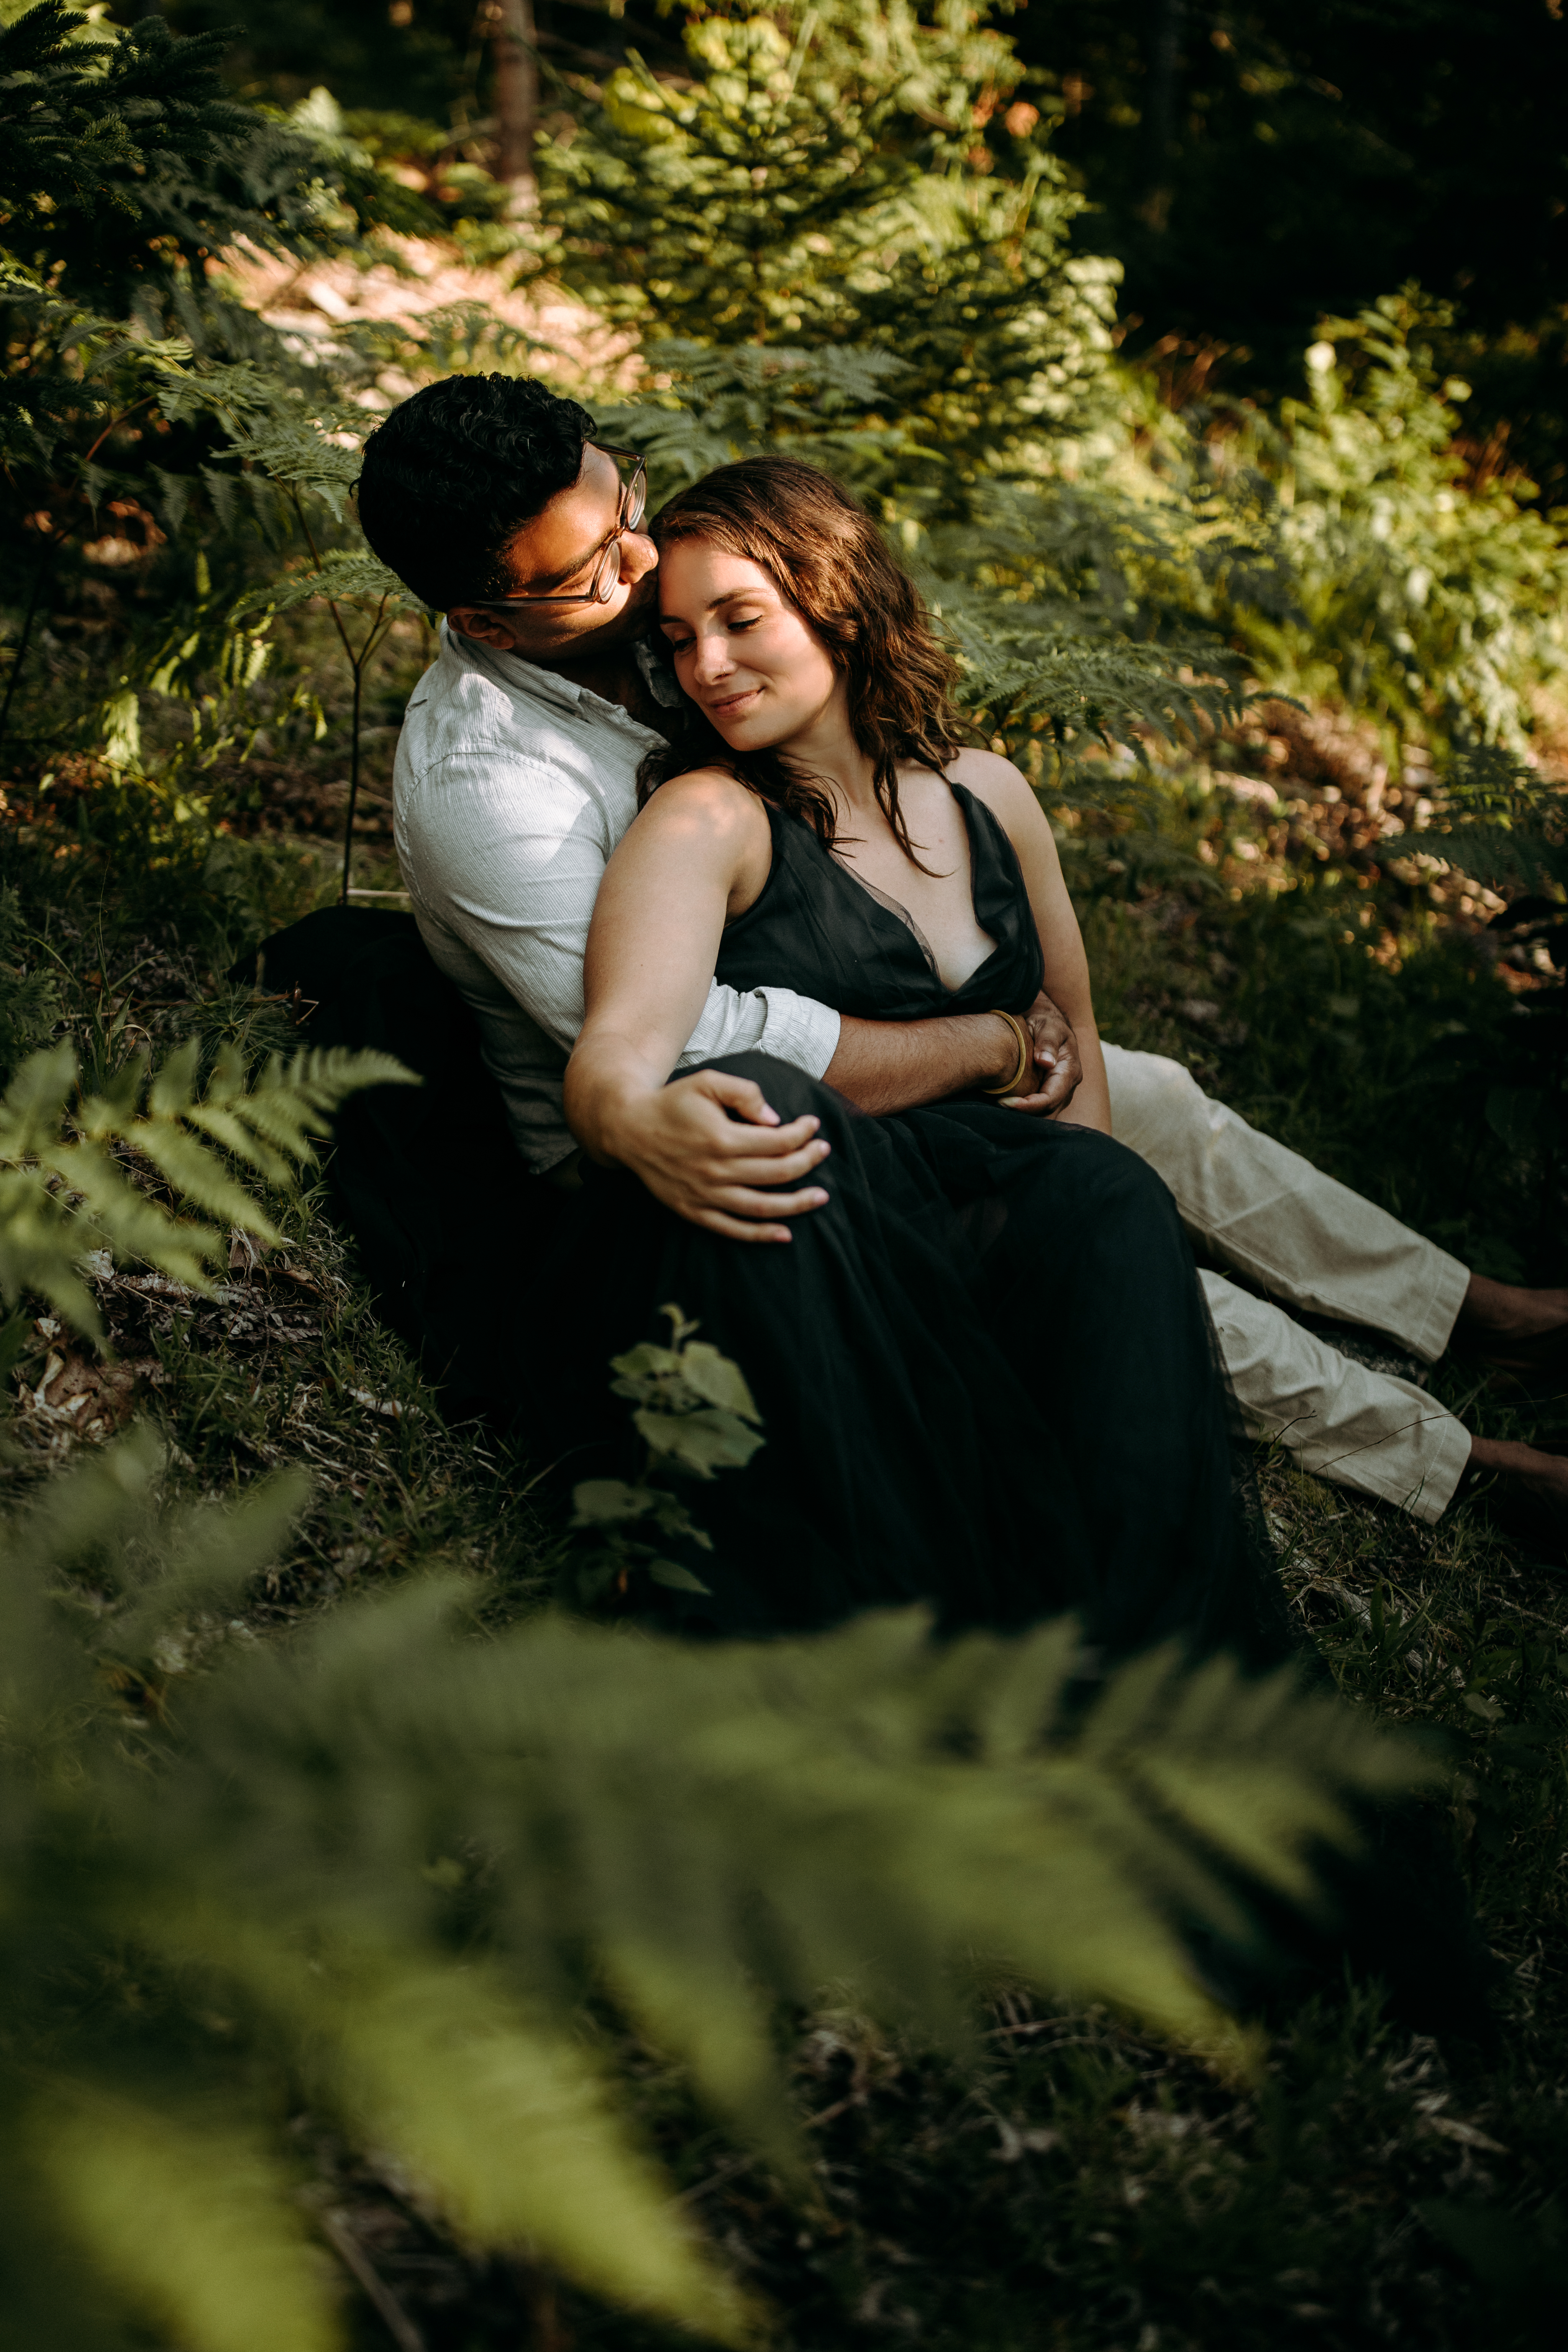 Couple is snuggling in the forest with ferns surrounding them on Cadillac mountain in Acadia National Park